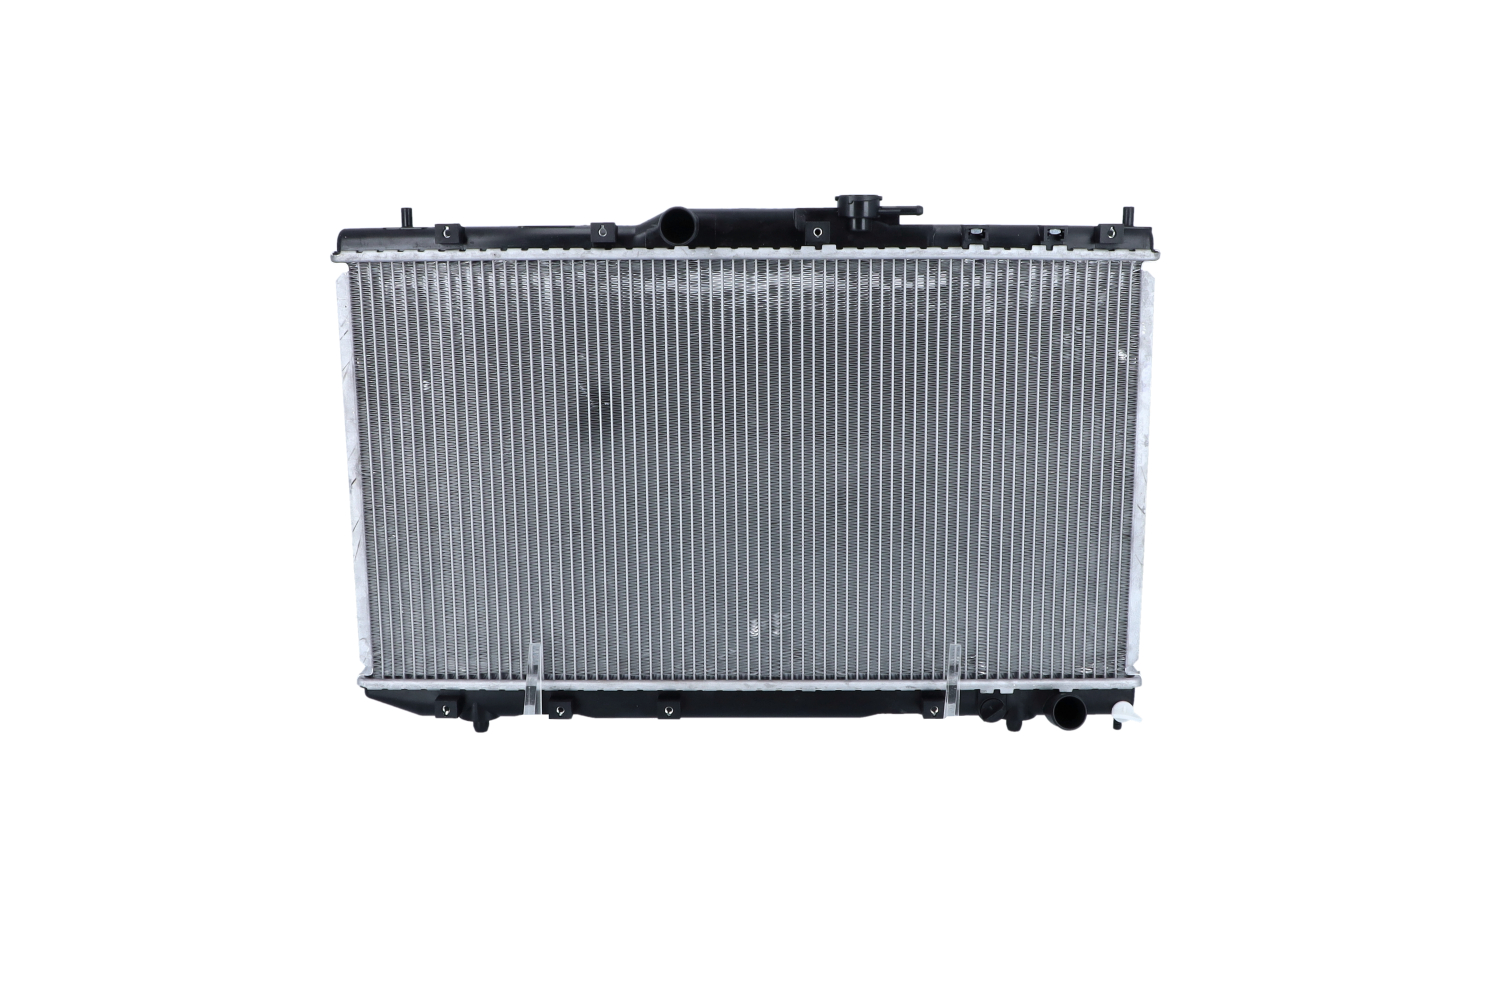 NRF 53446 Engine radiator Aluminium, 698 x 375 x 25 mm, with mounting parts, Brazed cooling fins